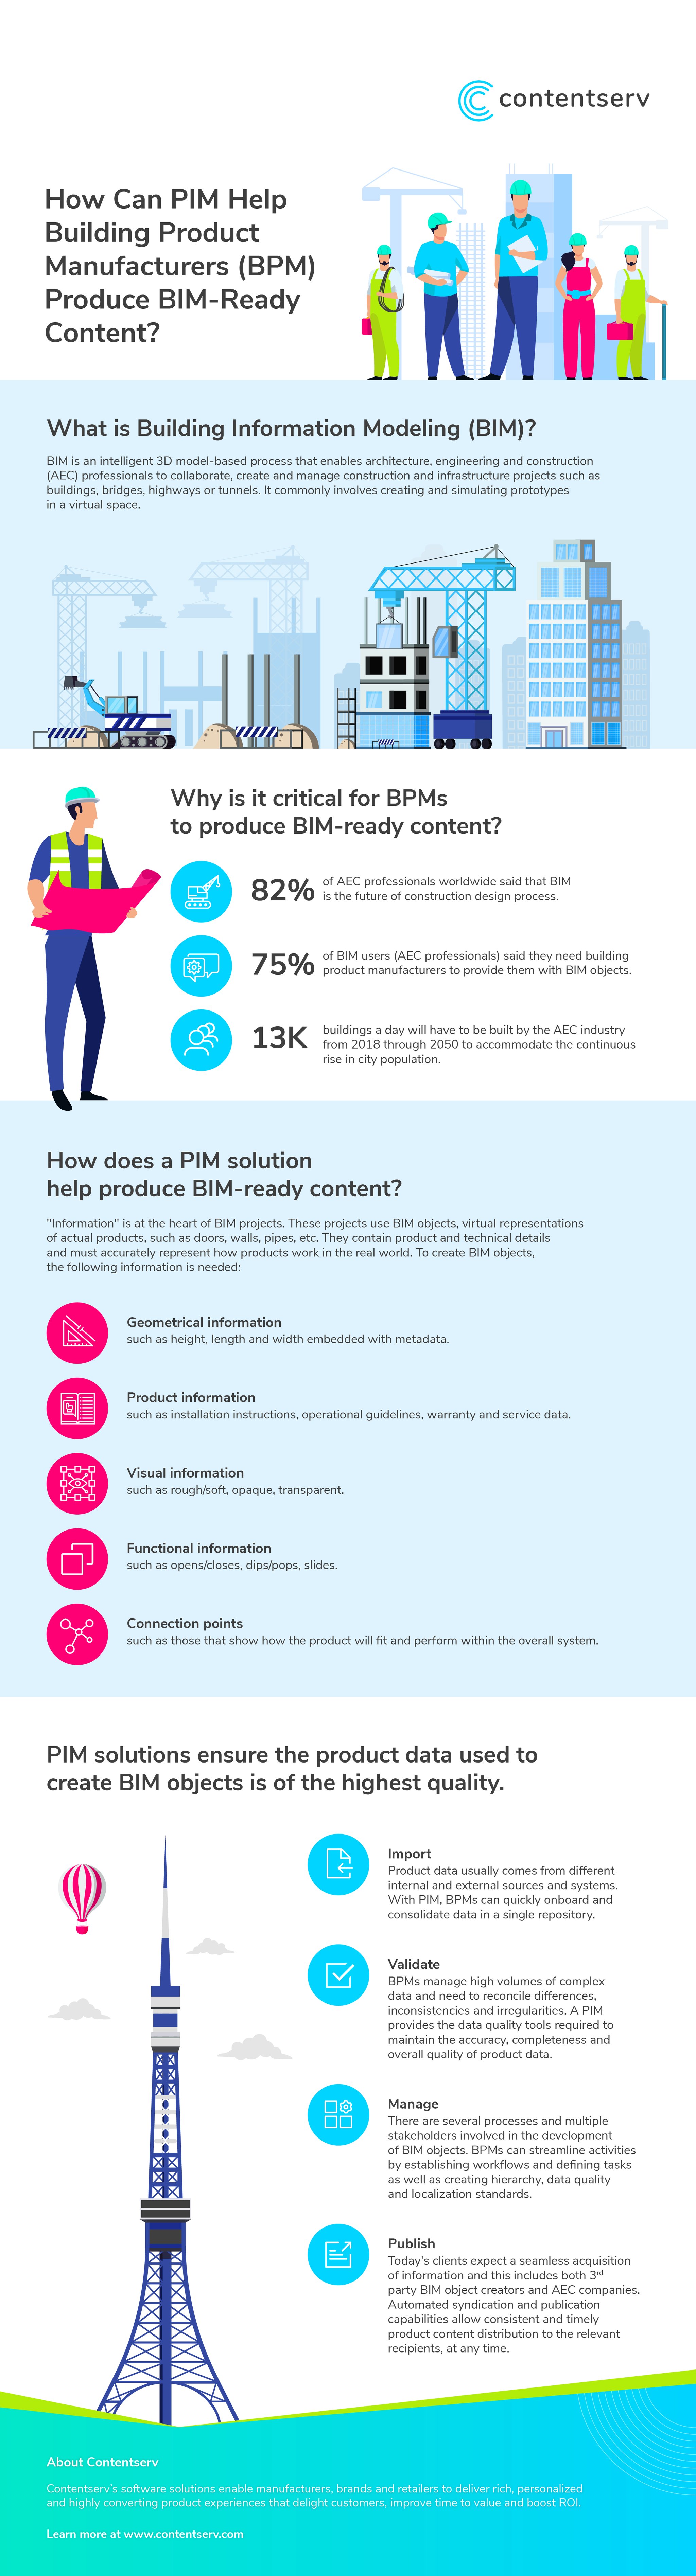 Infographic – PIM Helps Building Product Manufacturers Produce BIM-Ready Content